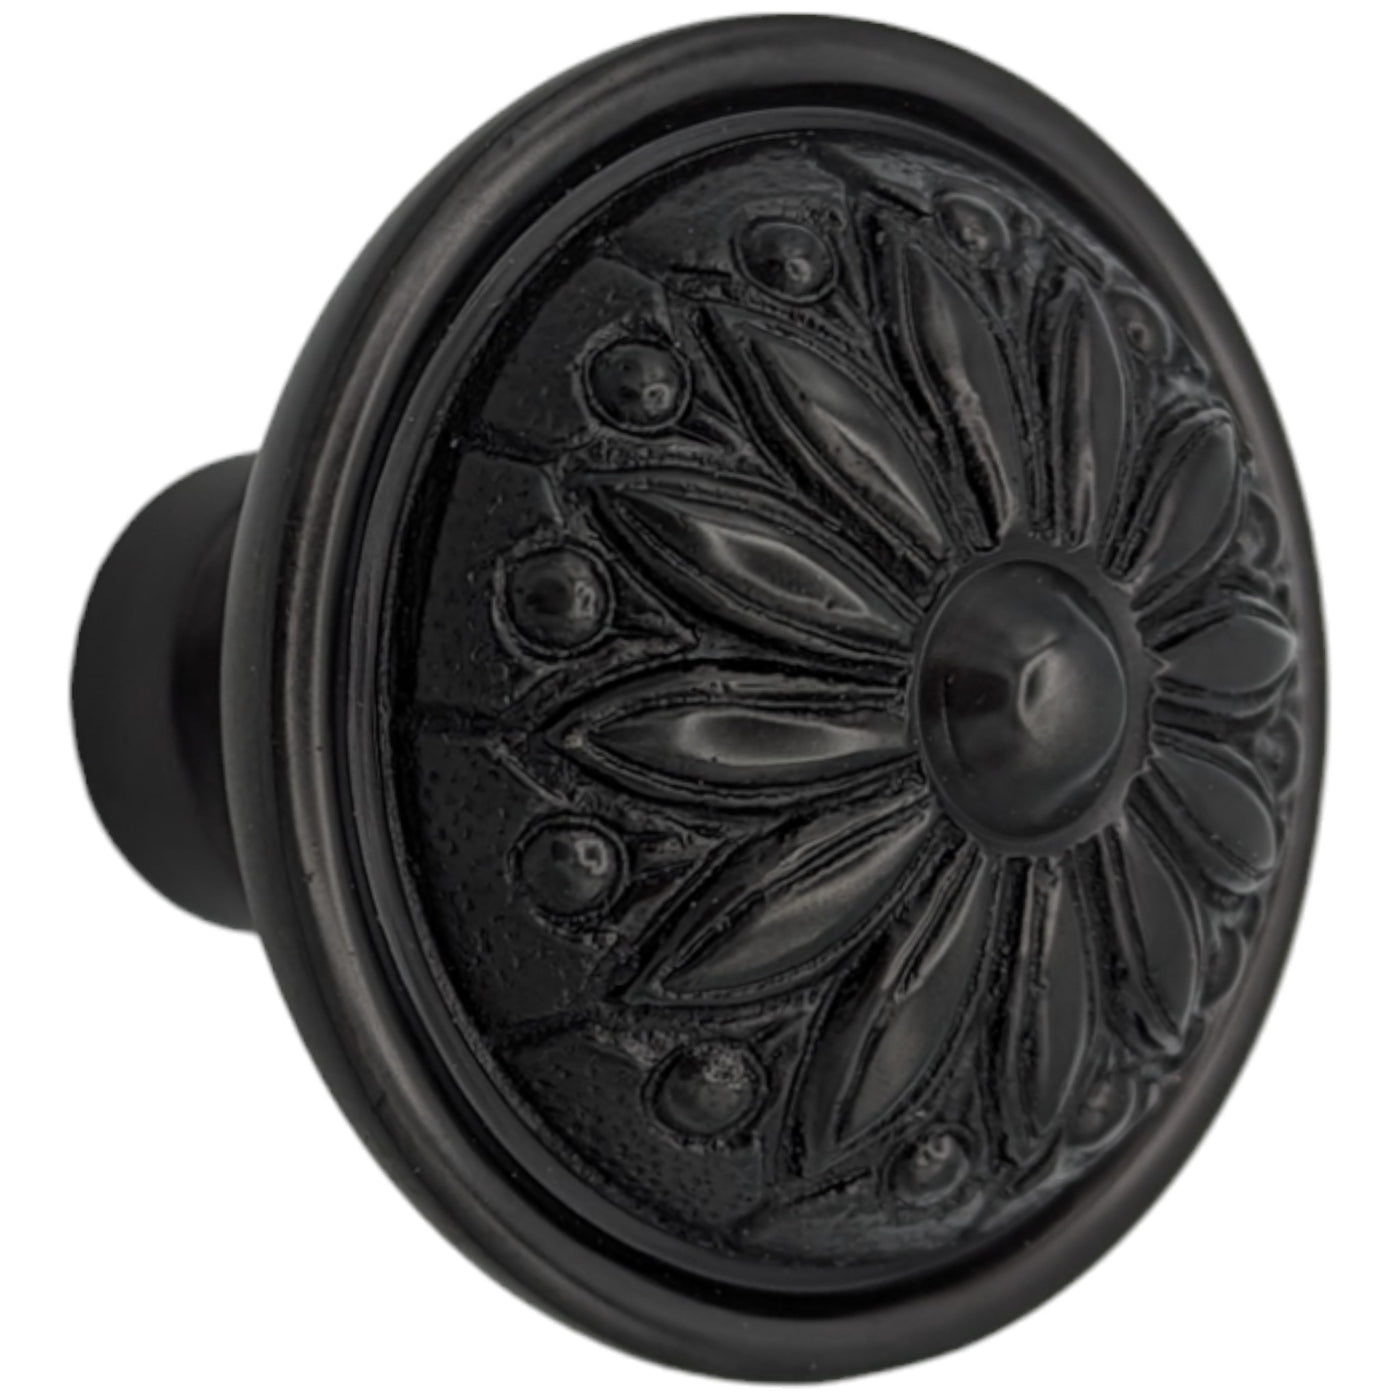 Floral Imprint Solid Brass Spare Door Knob Set (Several Finishes Available)